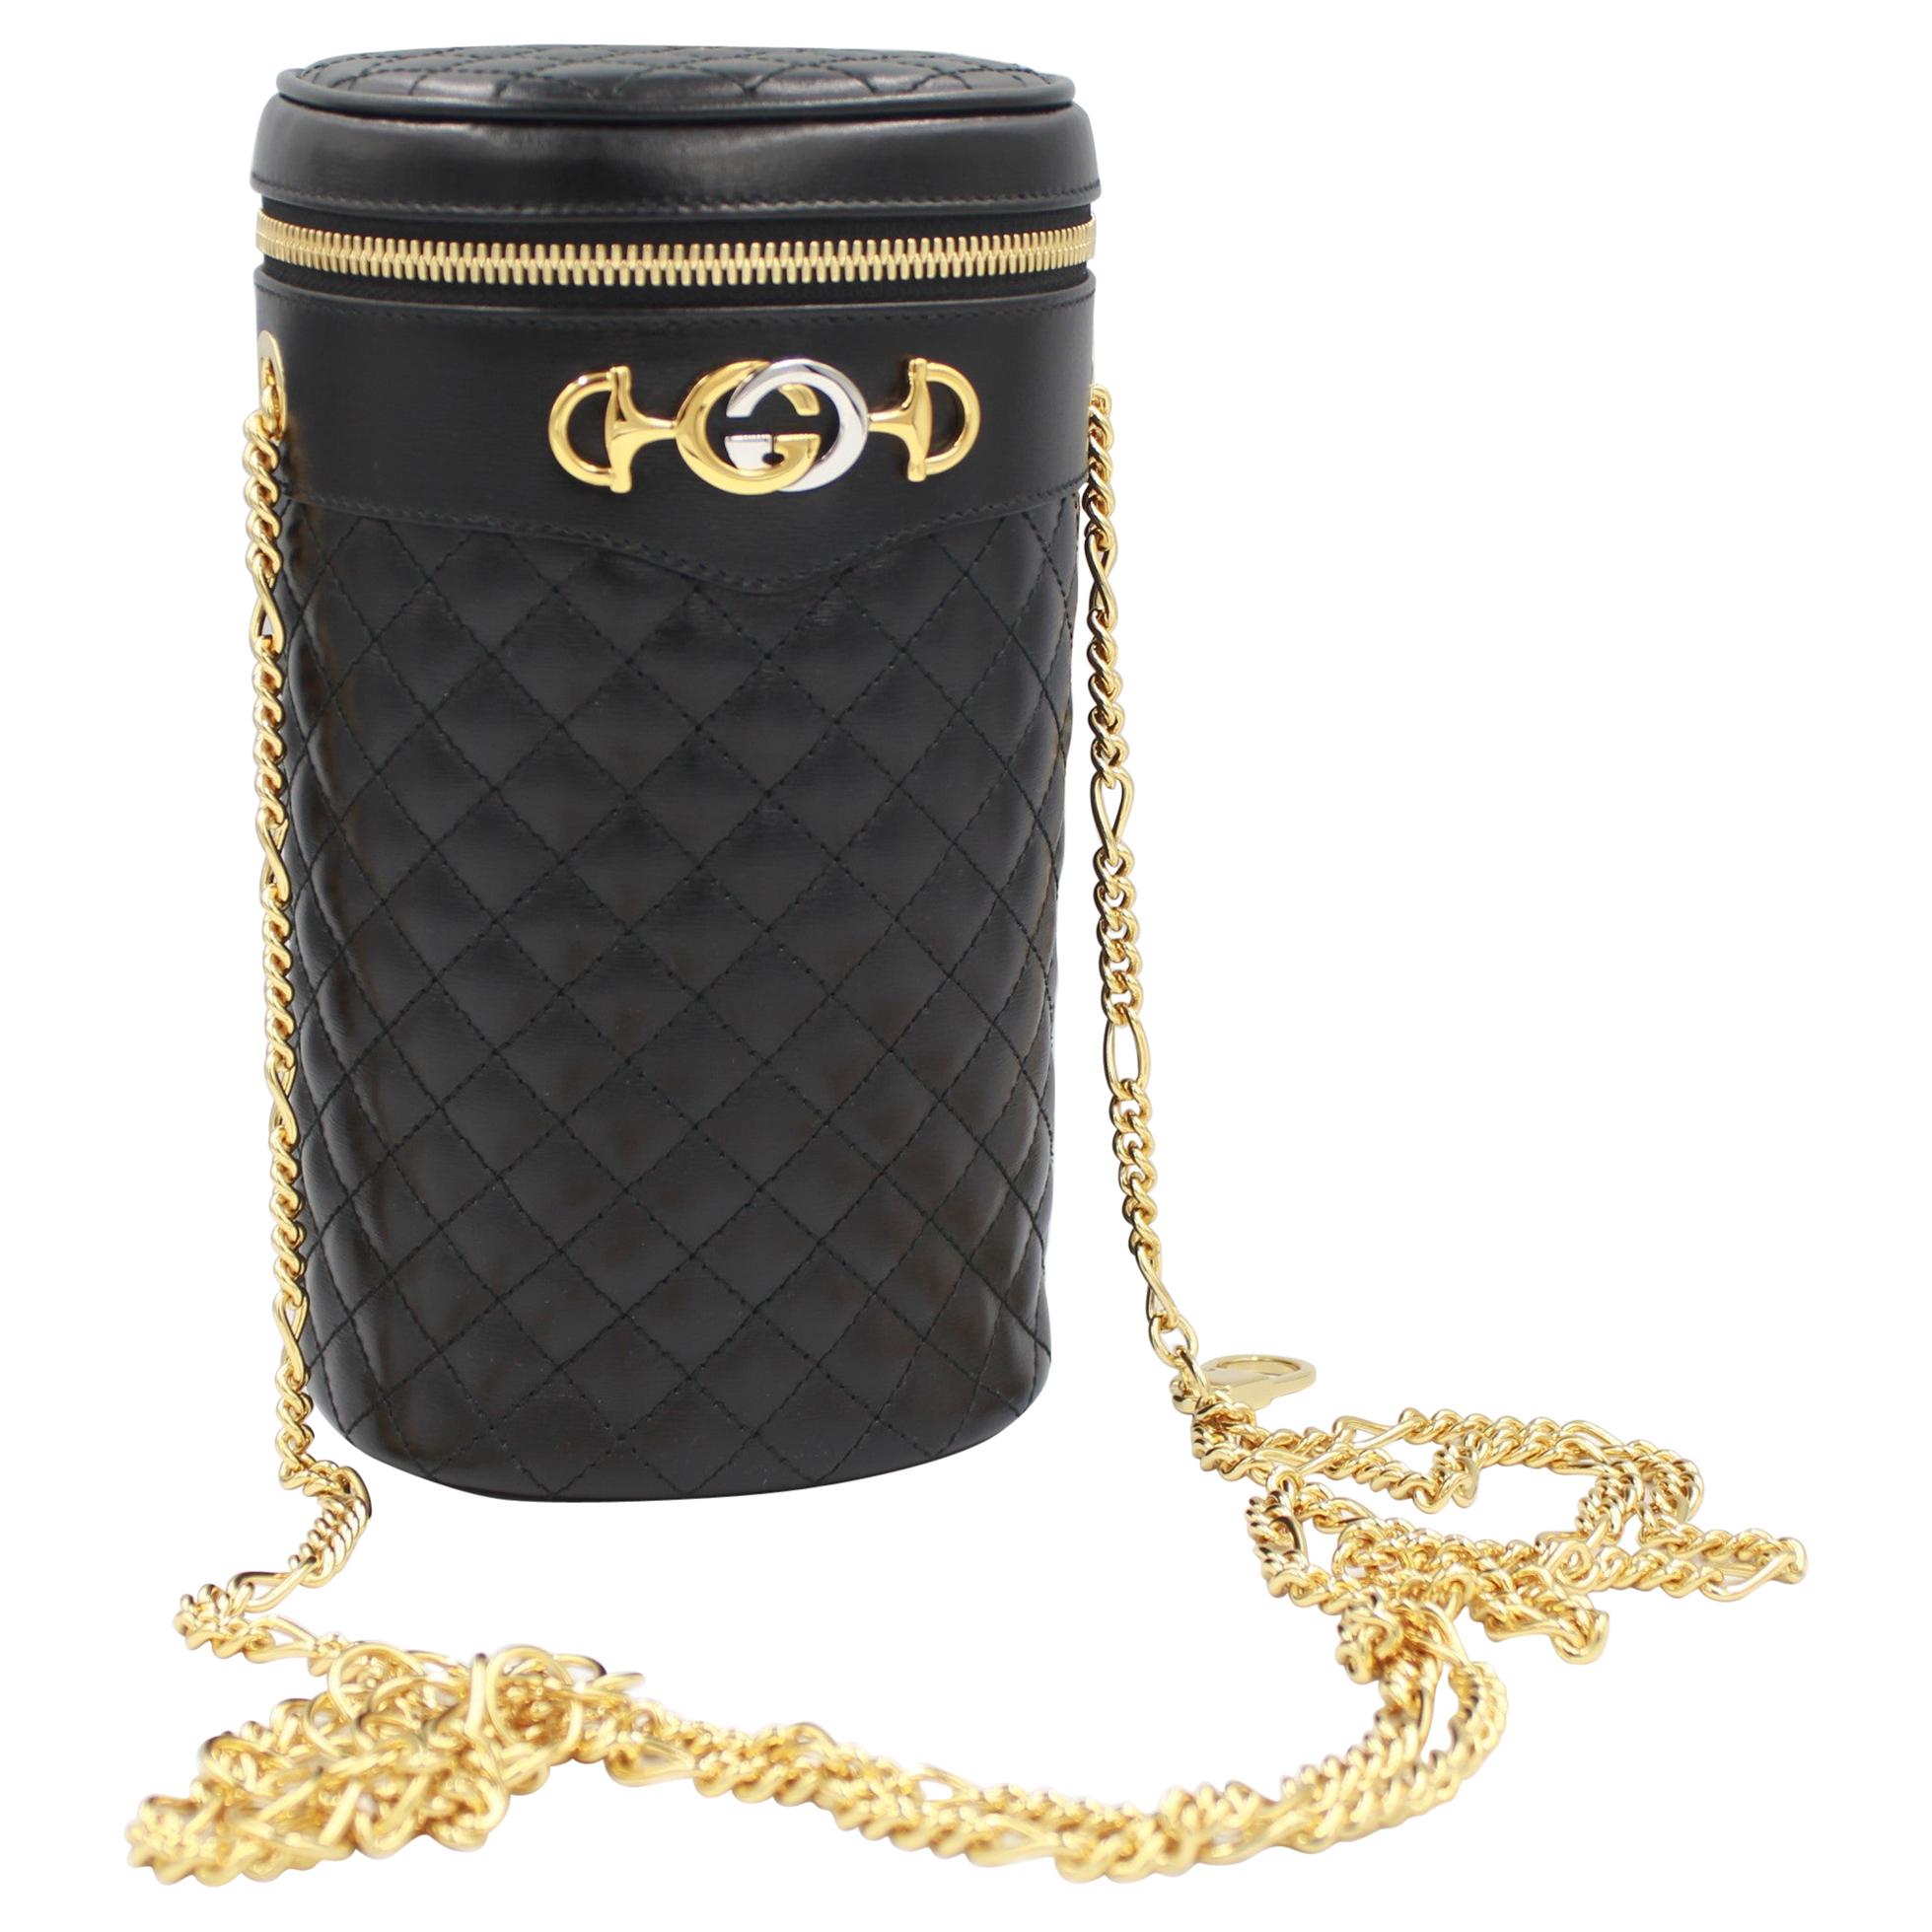 Gucci Belt bag / Cross body bag in black leather and gold chains. For Sale